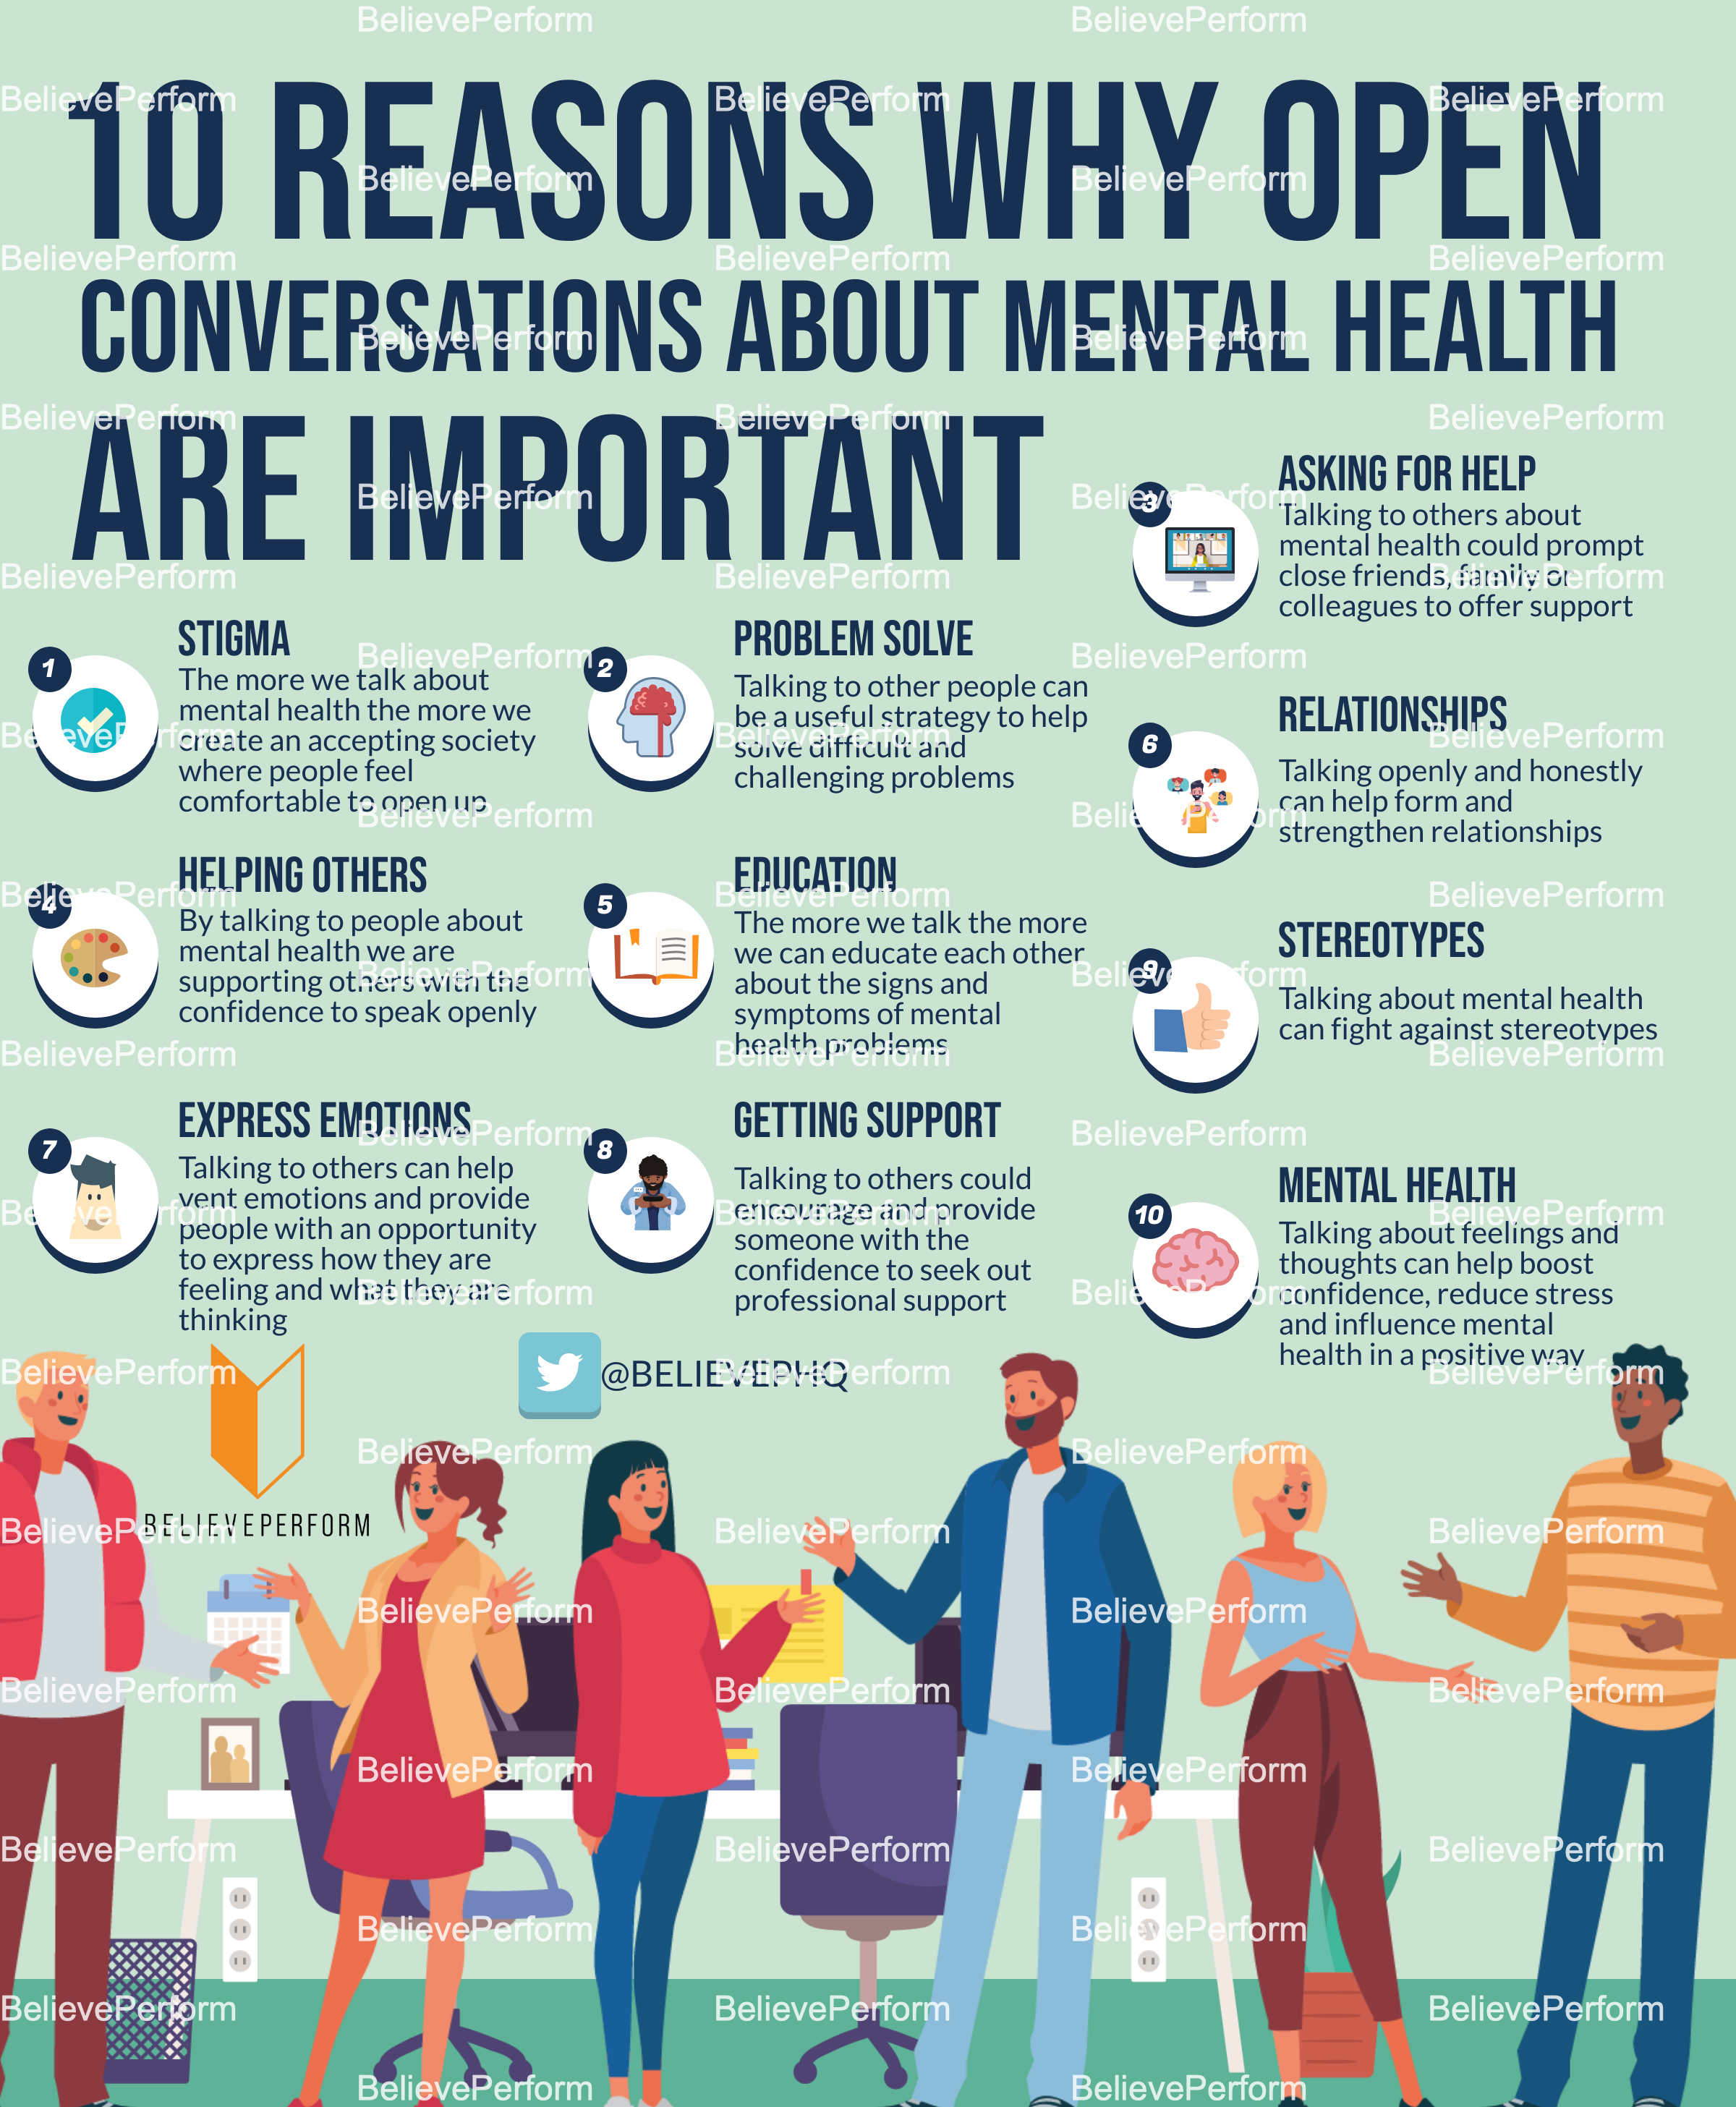 Why Talking About Mental Health is Important?